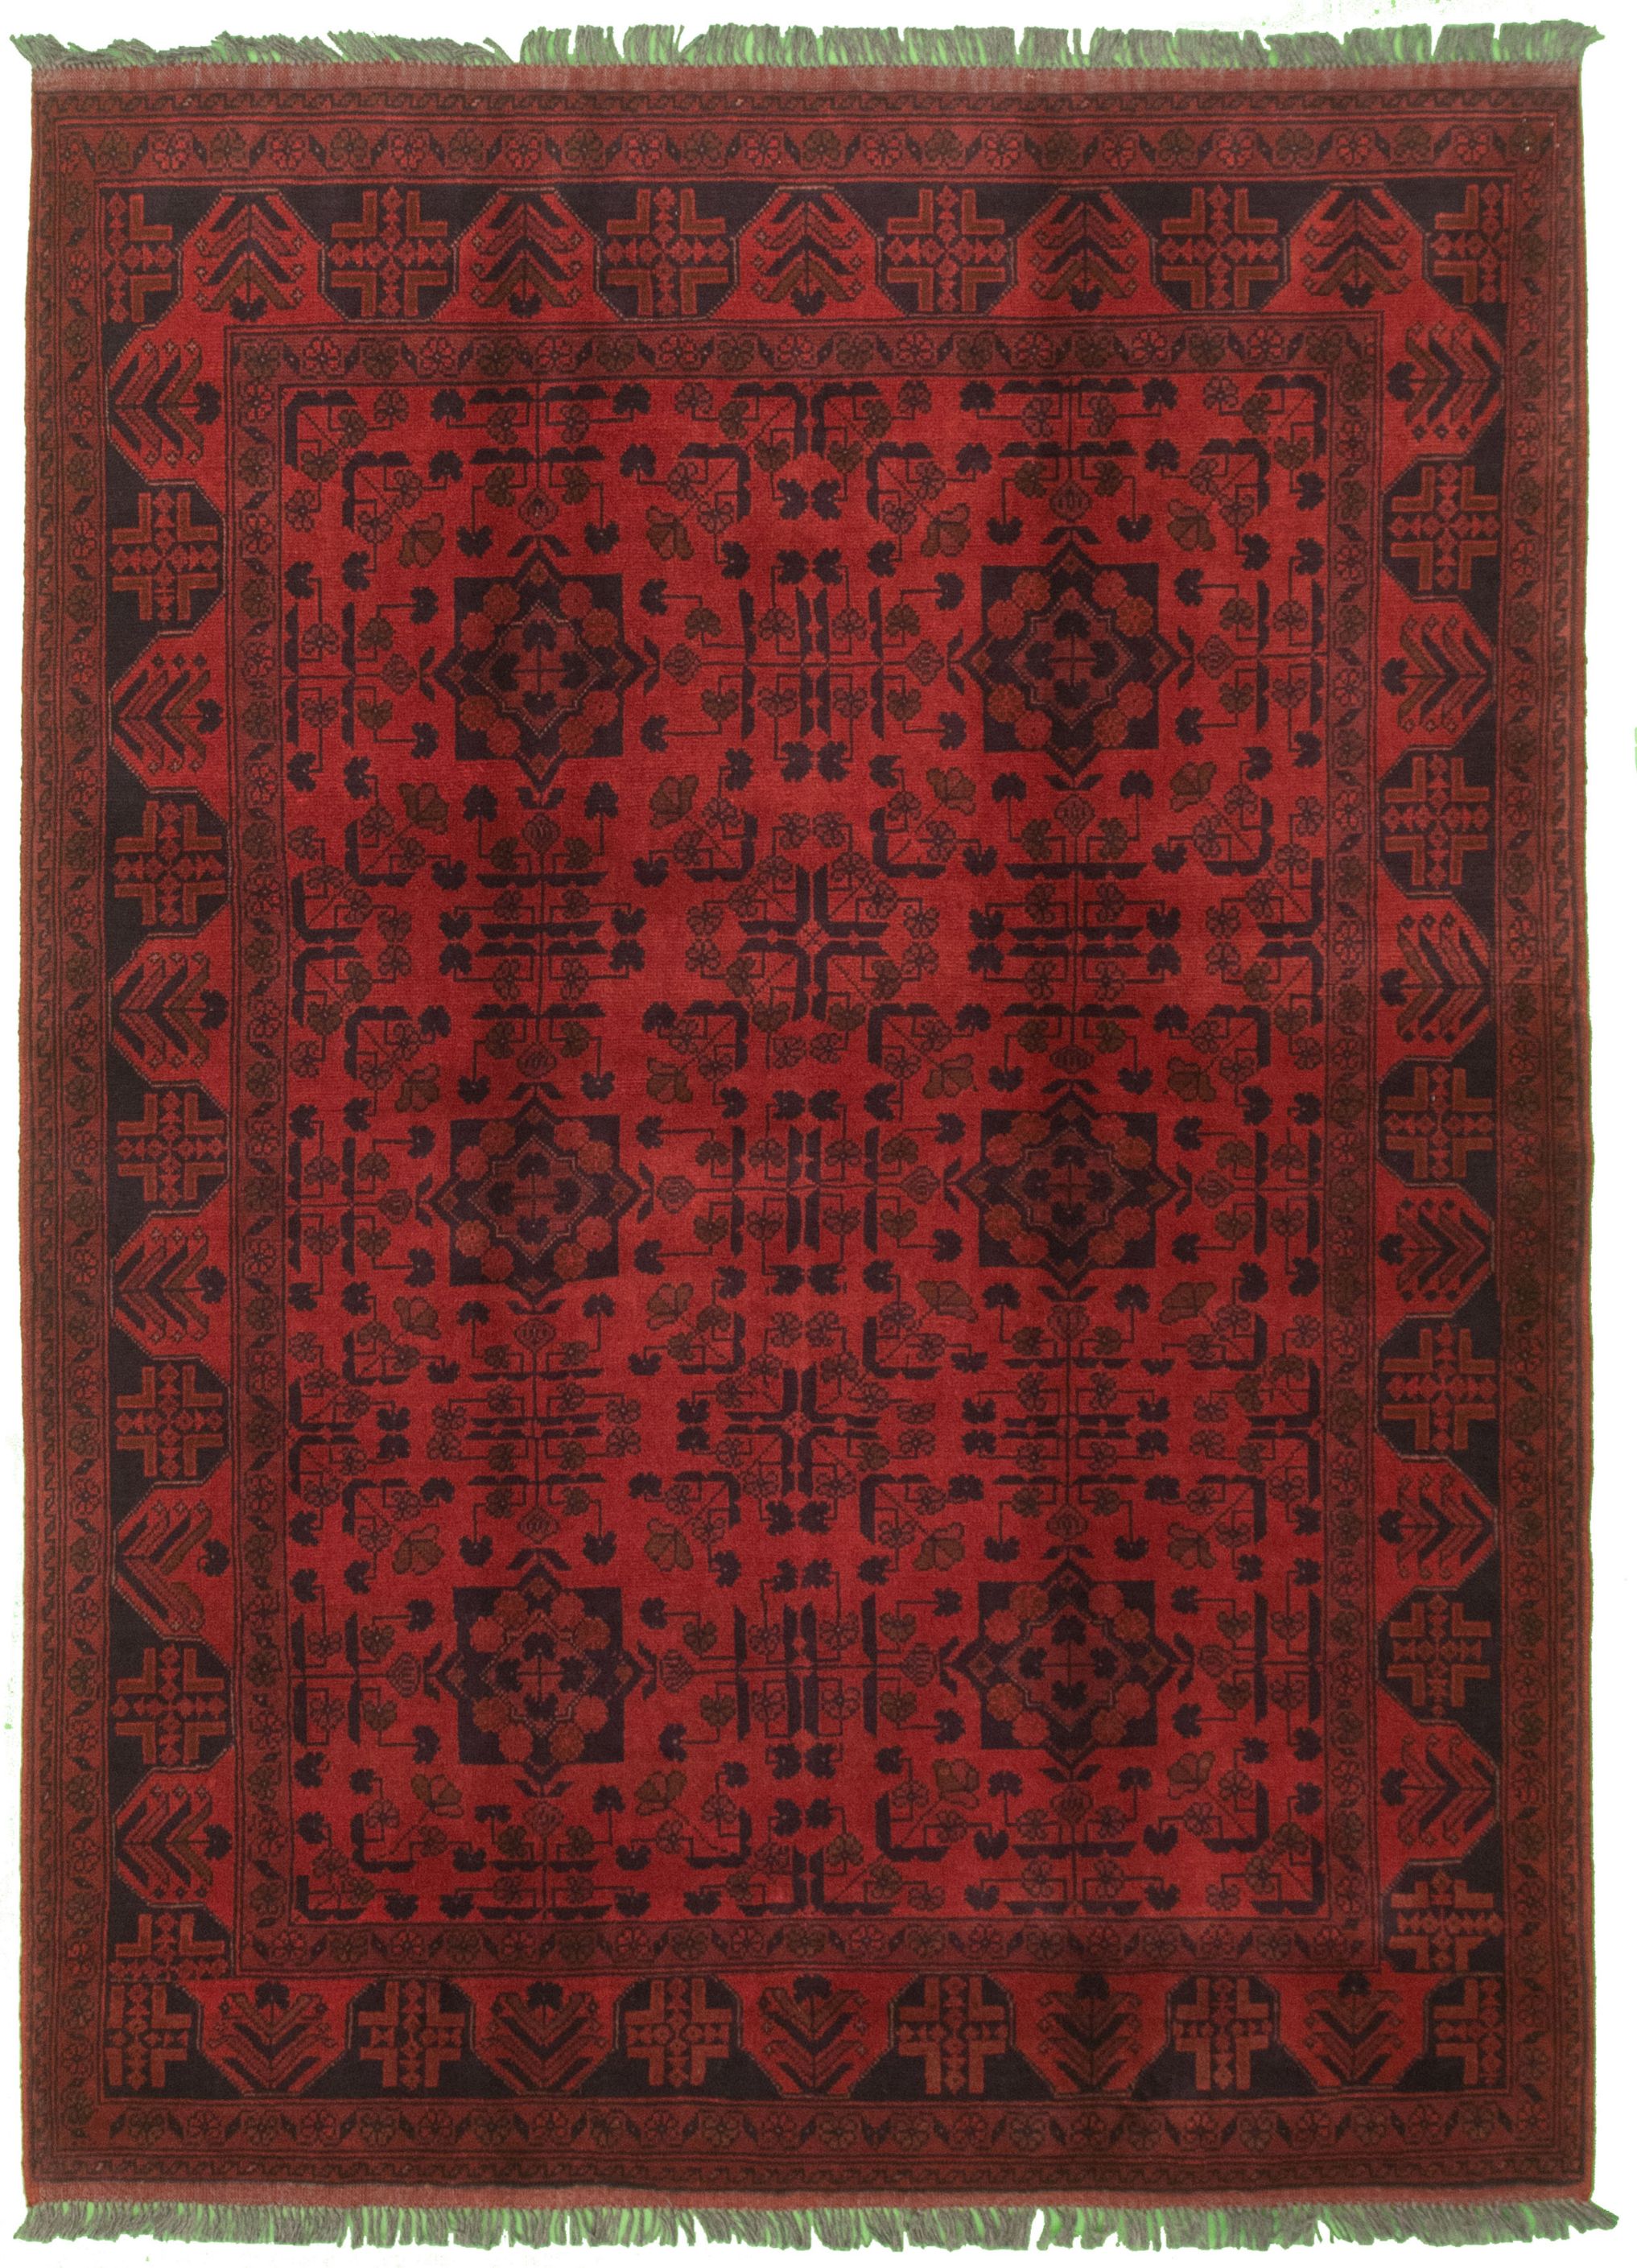 Hand-knotted Finest Khal Mohammadi Red Wool Rug 4'11" x 6'7"  Size: 4'11" x 6'7"  